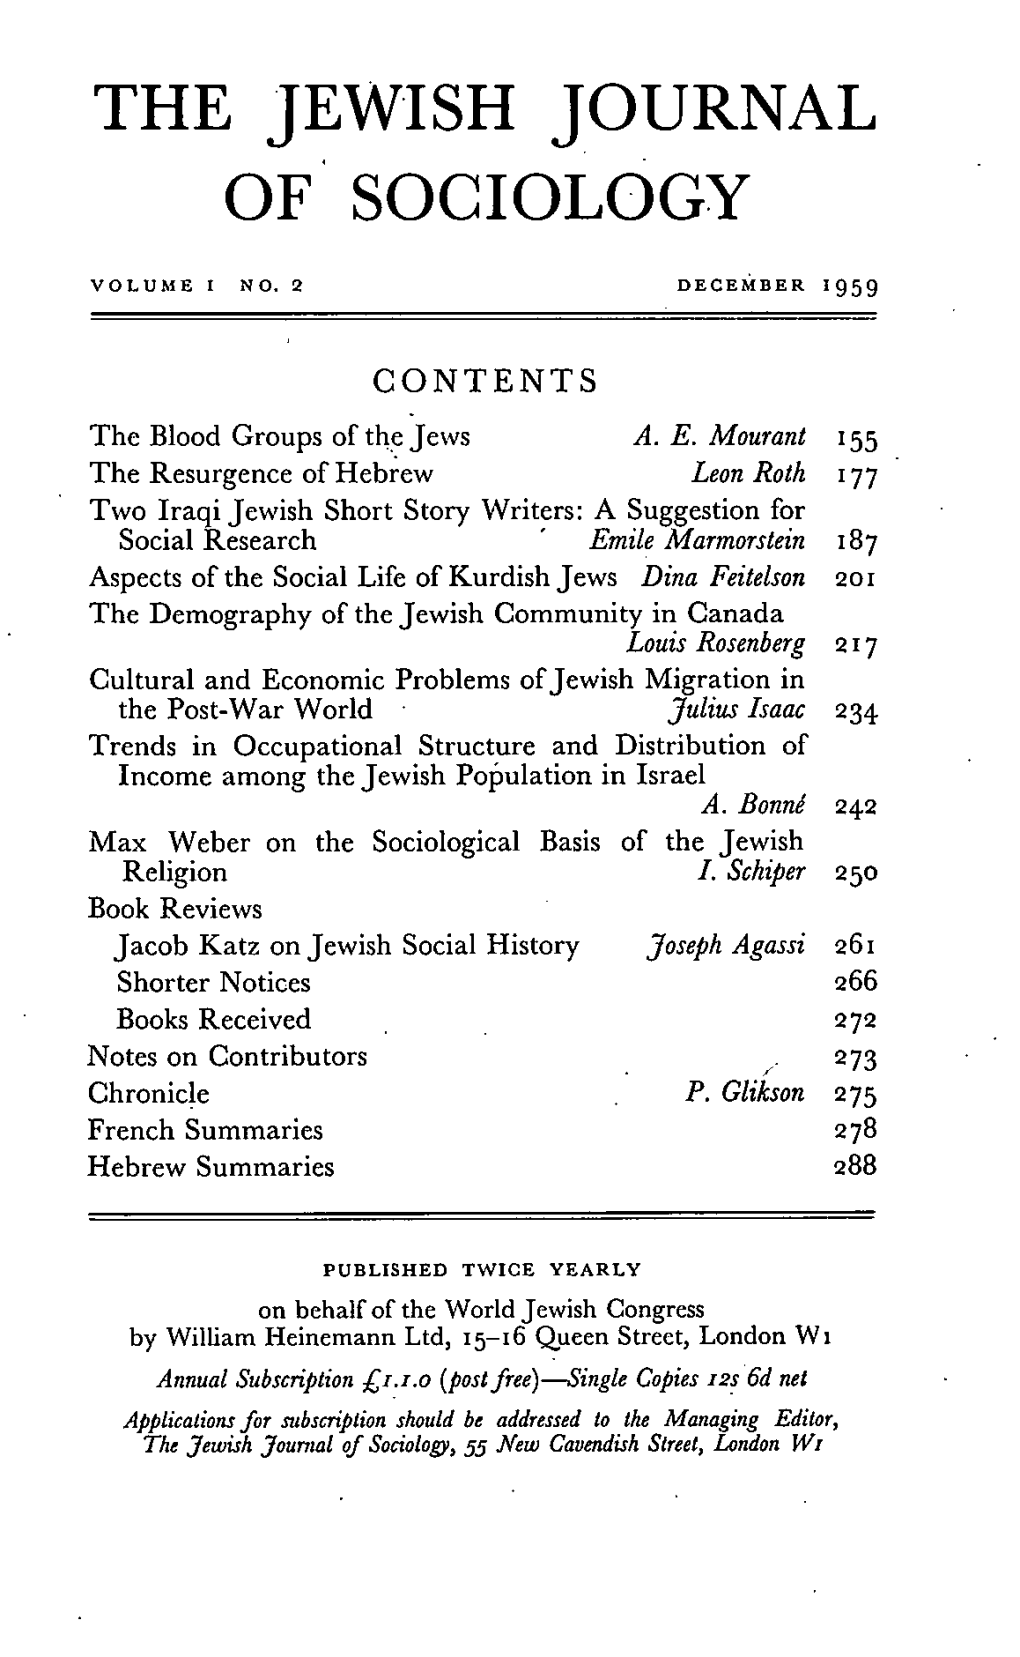 The Jewish Journal of Sociology